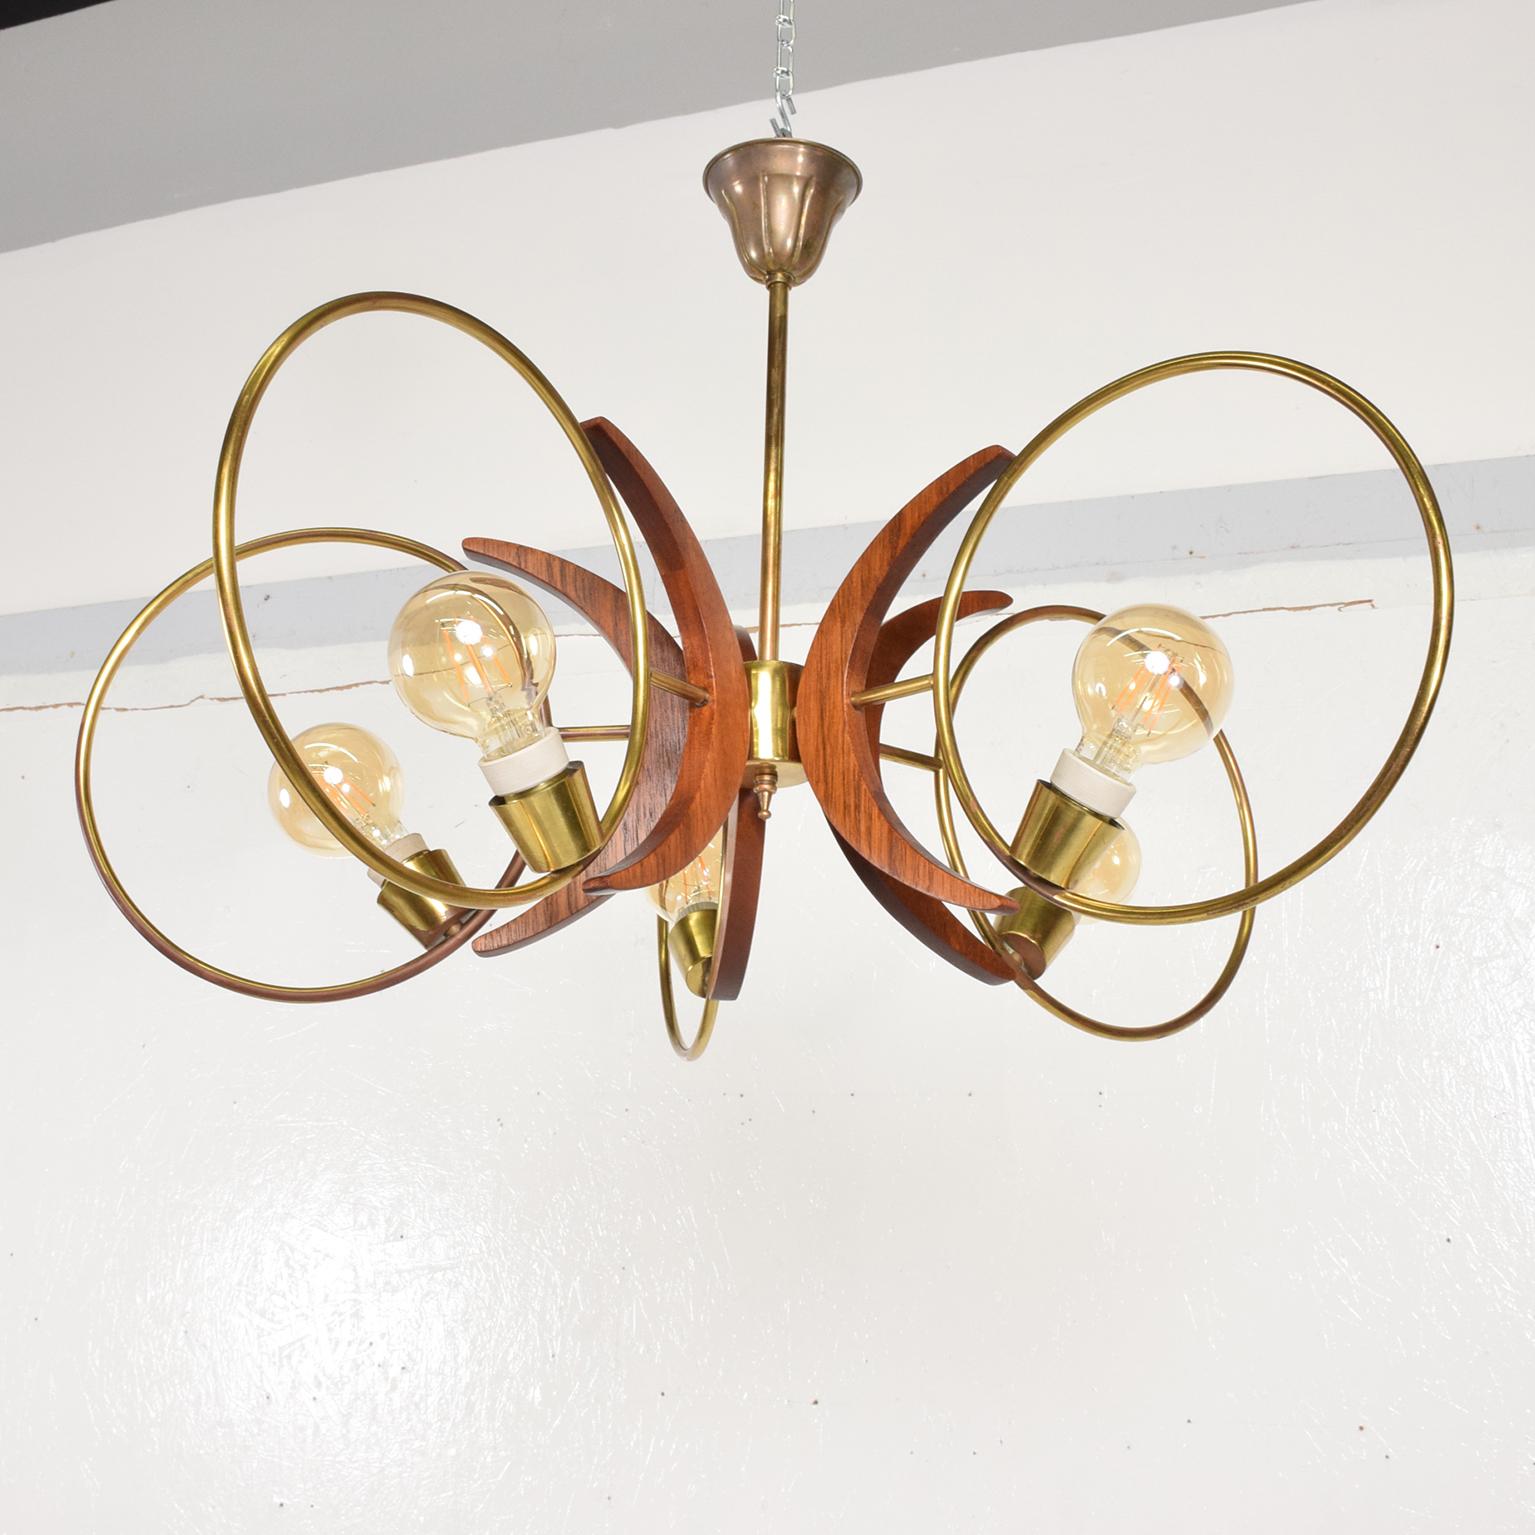 AMBIANIC presents
Modern Five Ring Swirling Sculptural Chandelier from Mexico City 1960s
Unmarked. Crisp Clean design.
Features five rings in patinated brass sculptural mahogany wood ornamentation.
33 in diameter x 22 tall inches.
Vintage patina on